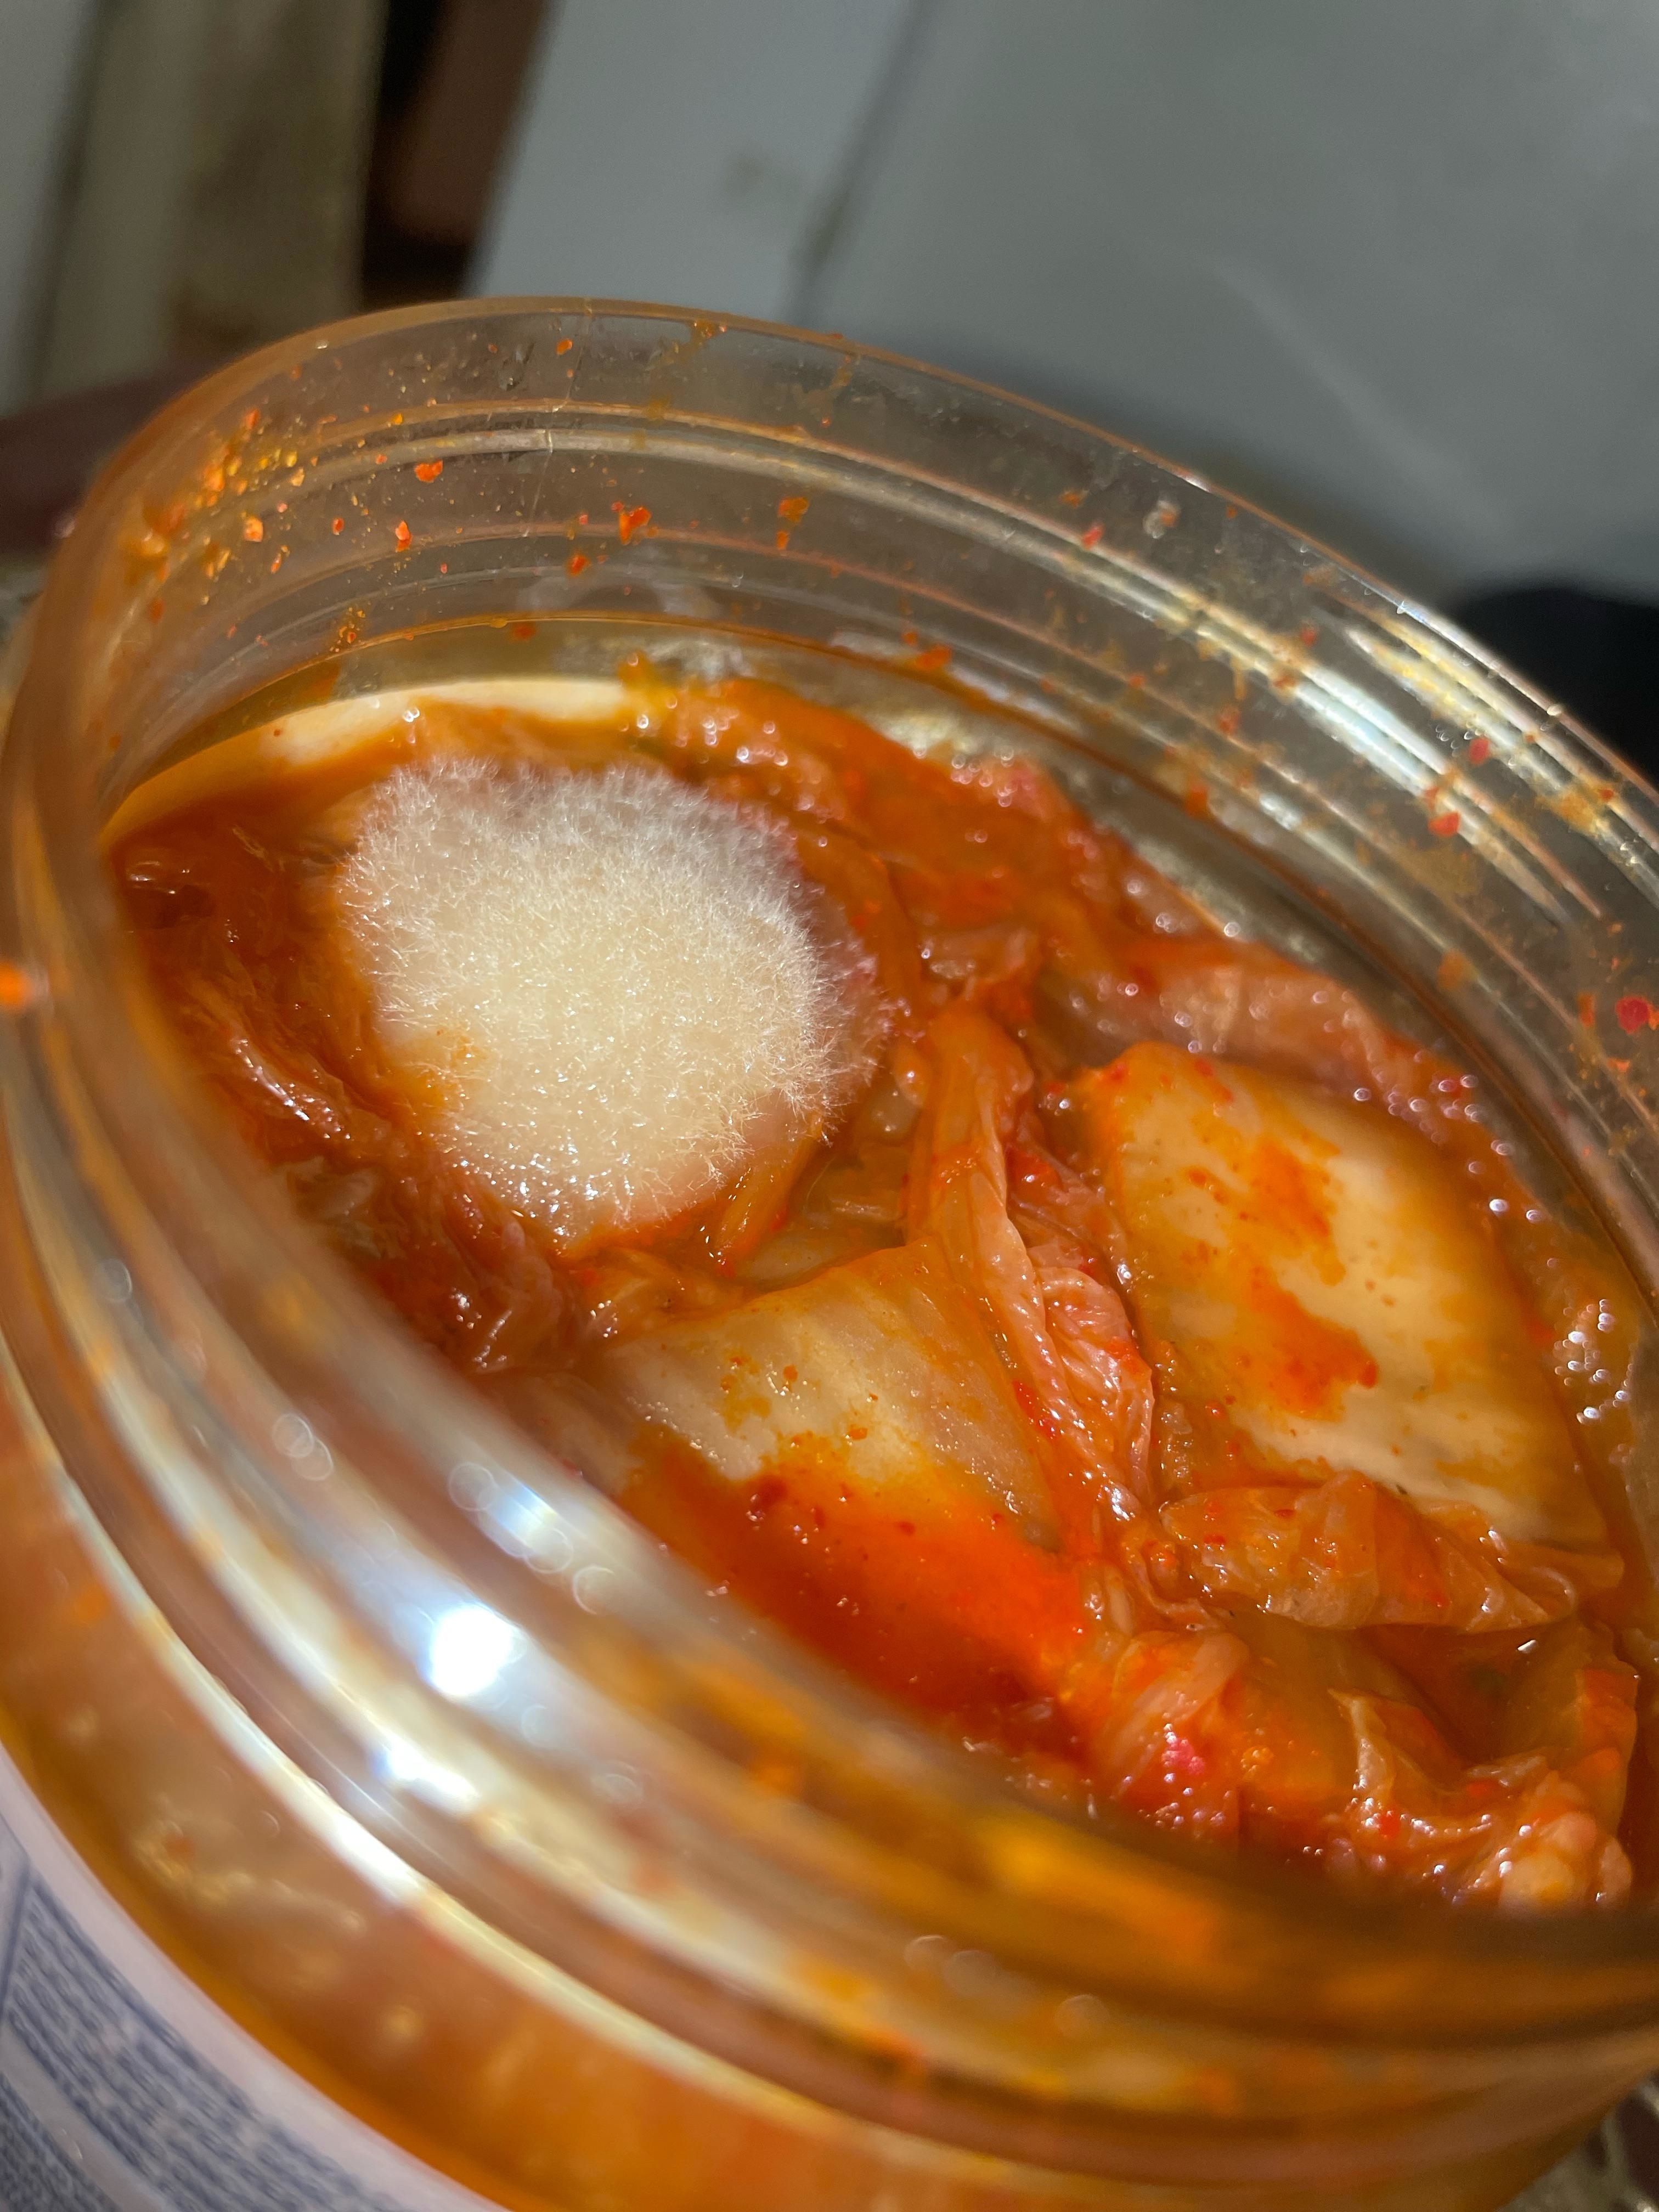 a jar of kimchi with mold growing on top